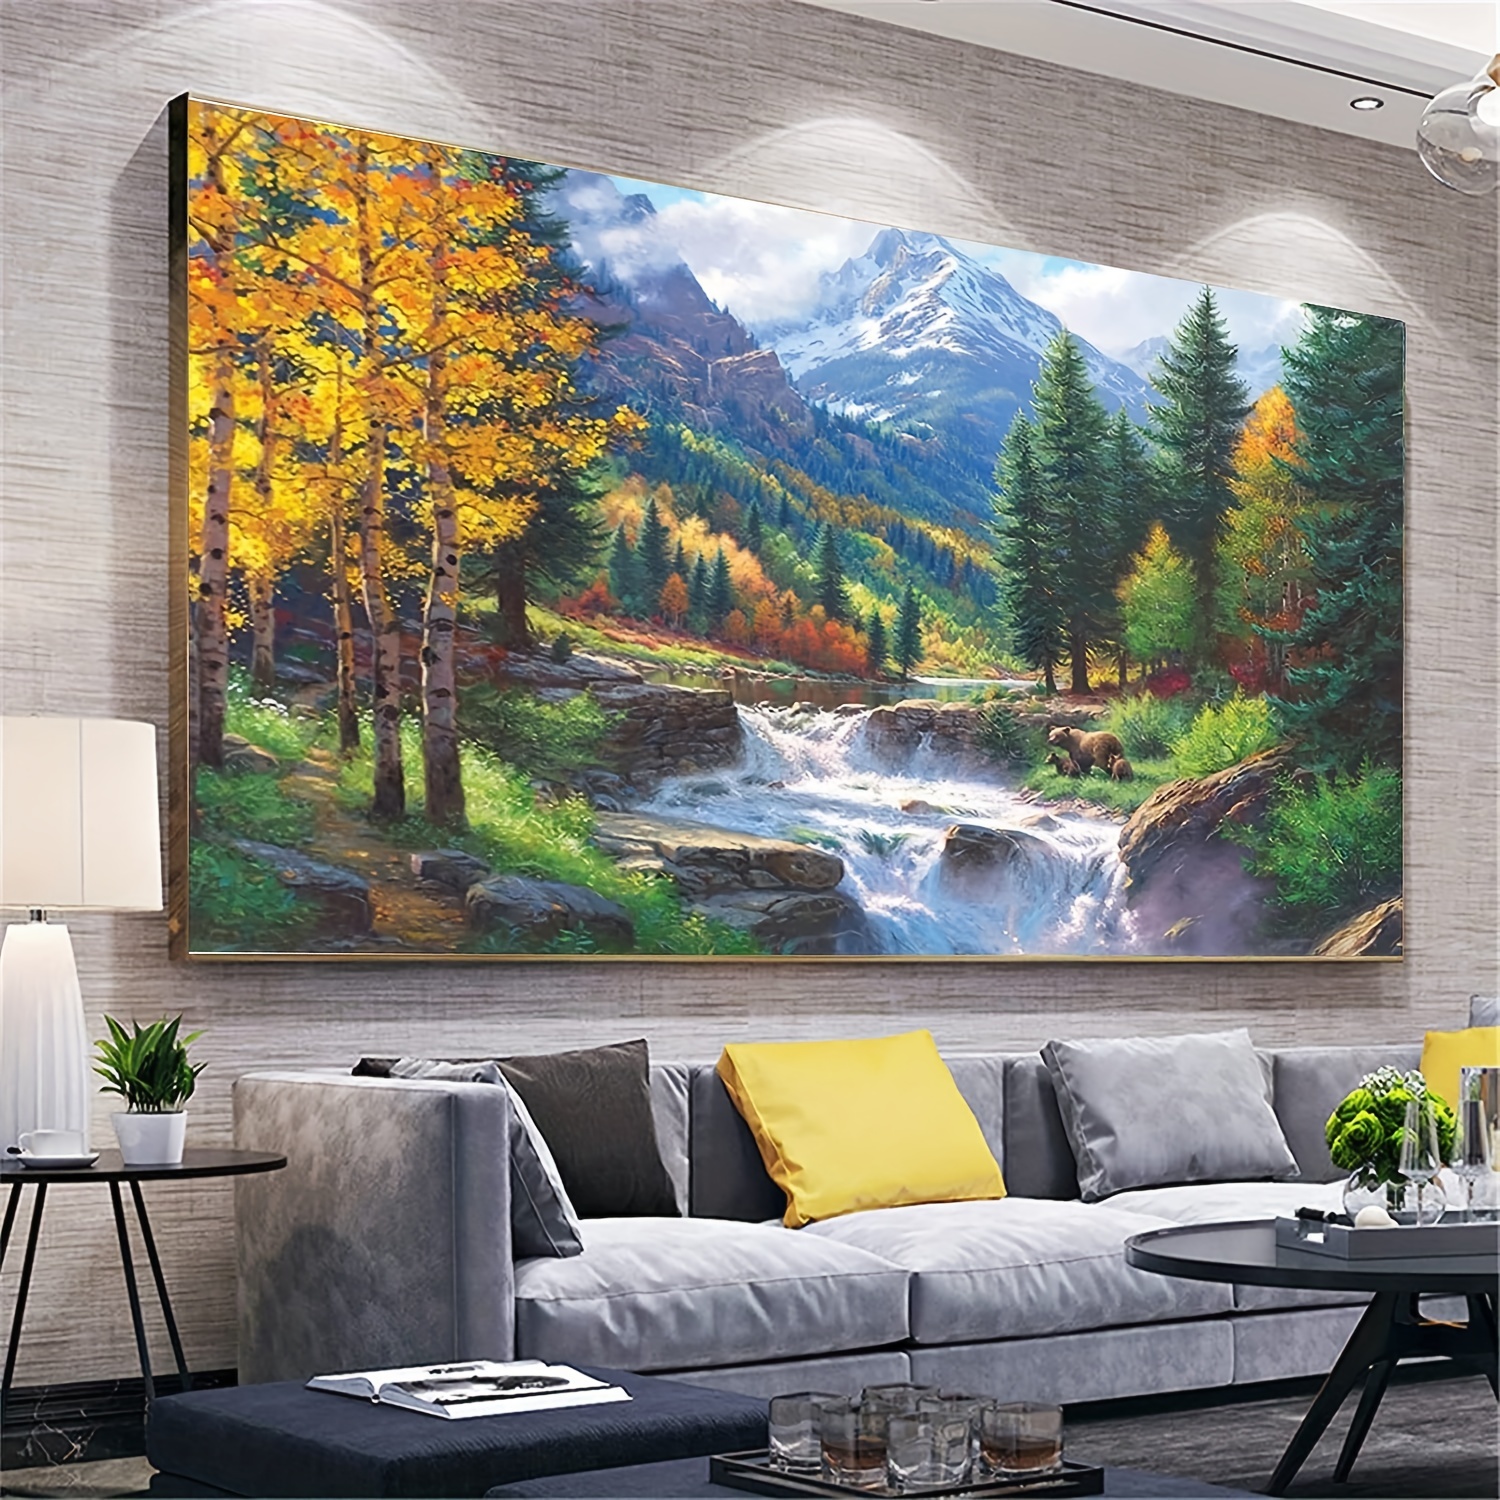 Adult DIY Large Diamond Painting Kits For Adults,5D DIY Large Size